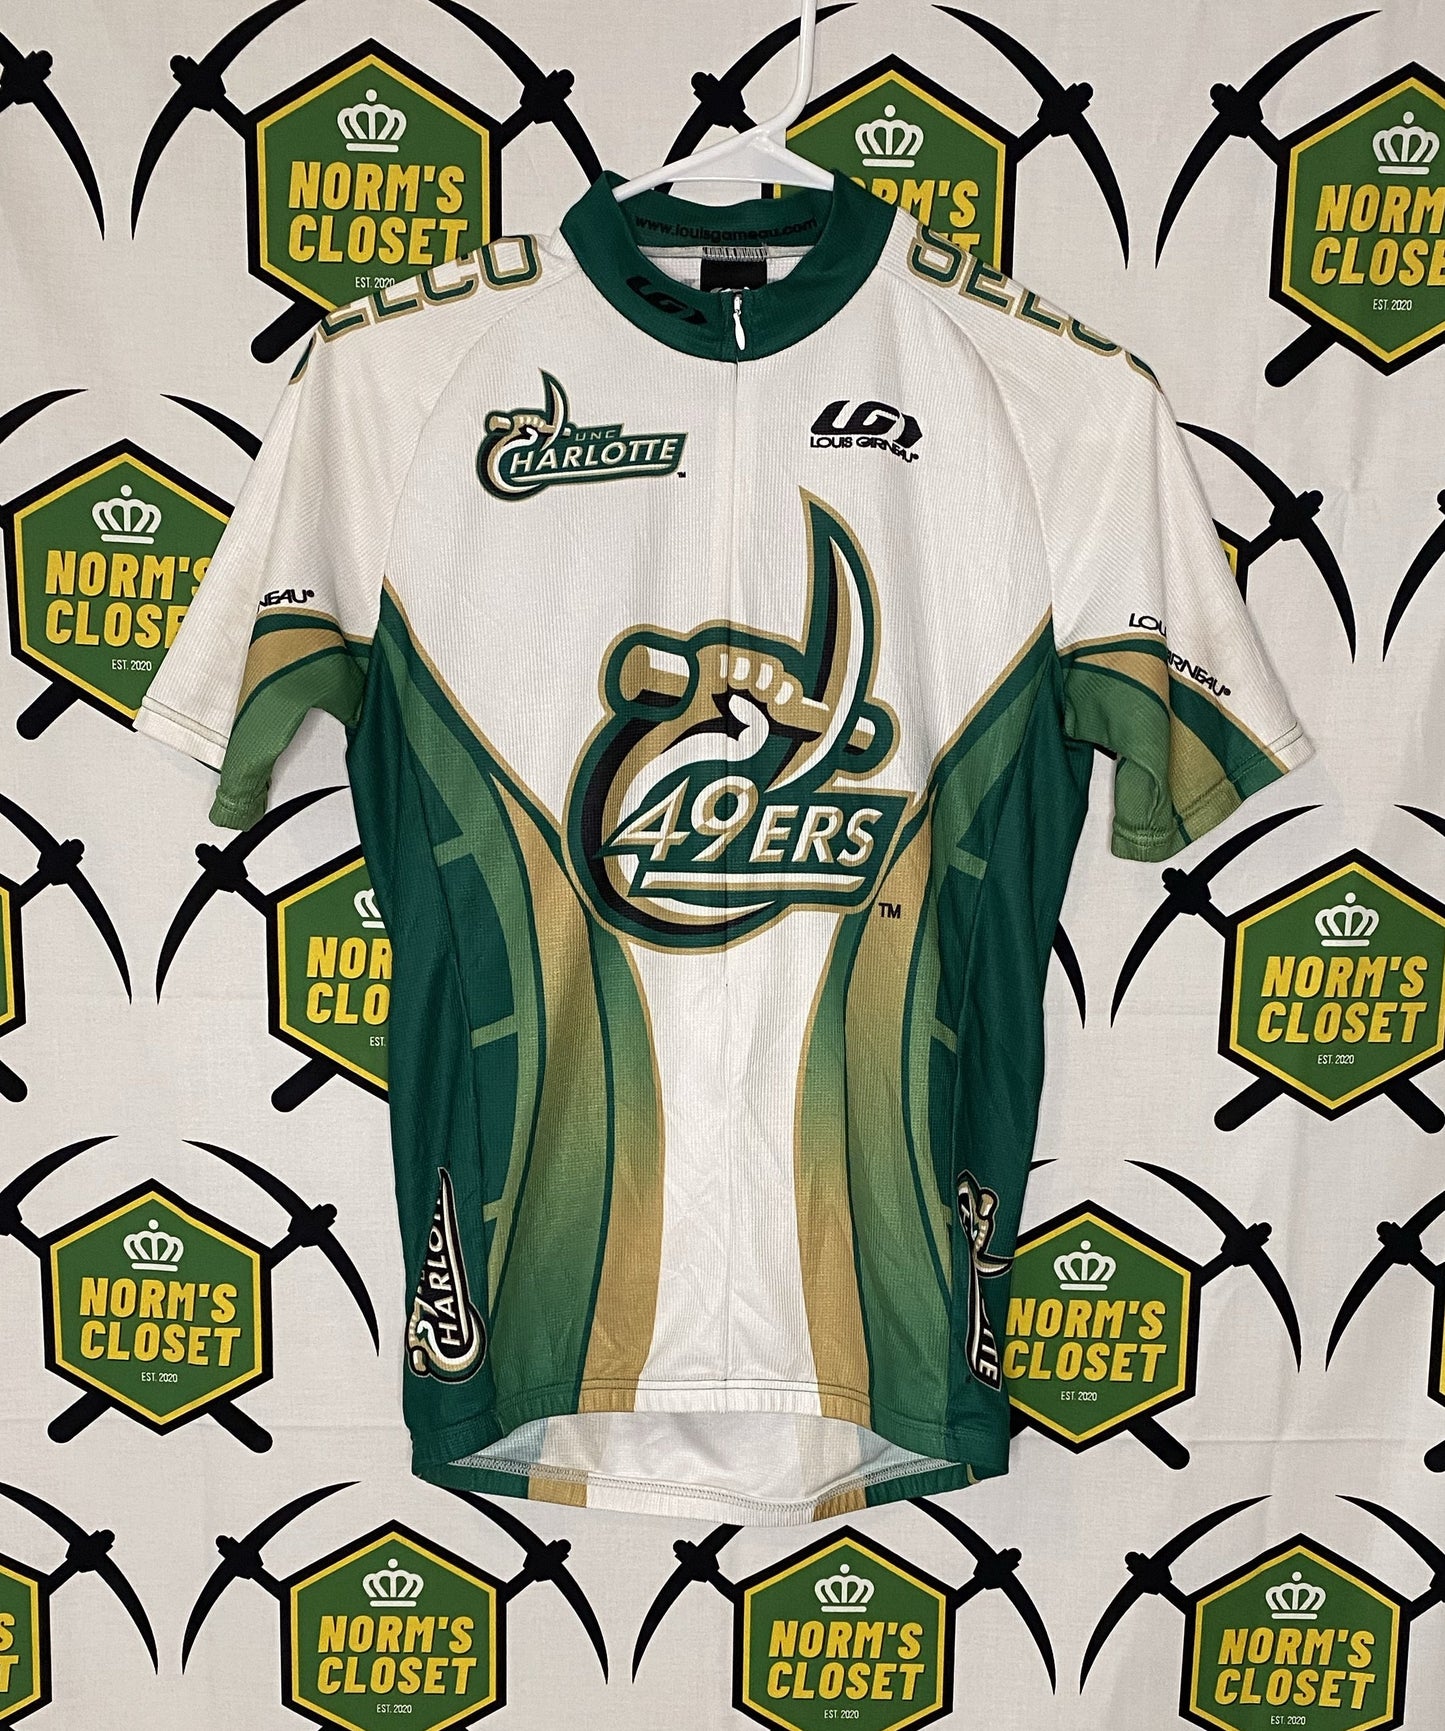 Charlotte 49ers Cyclist Top by Black Sheep Cycles